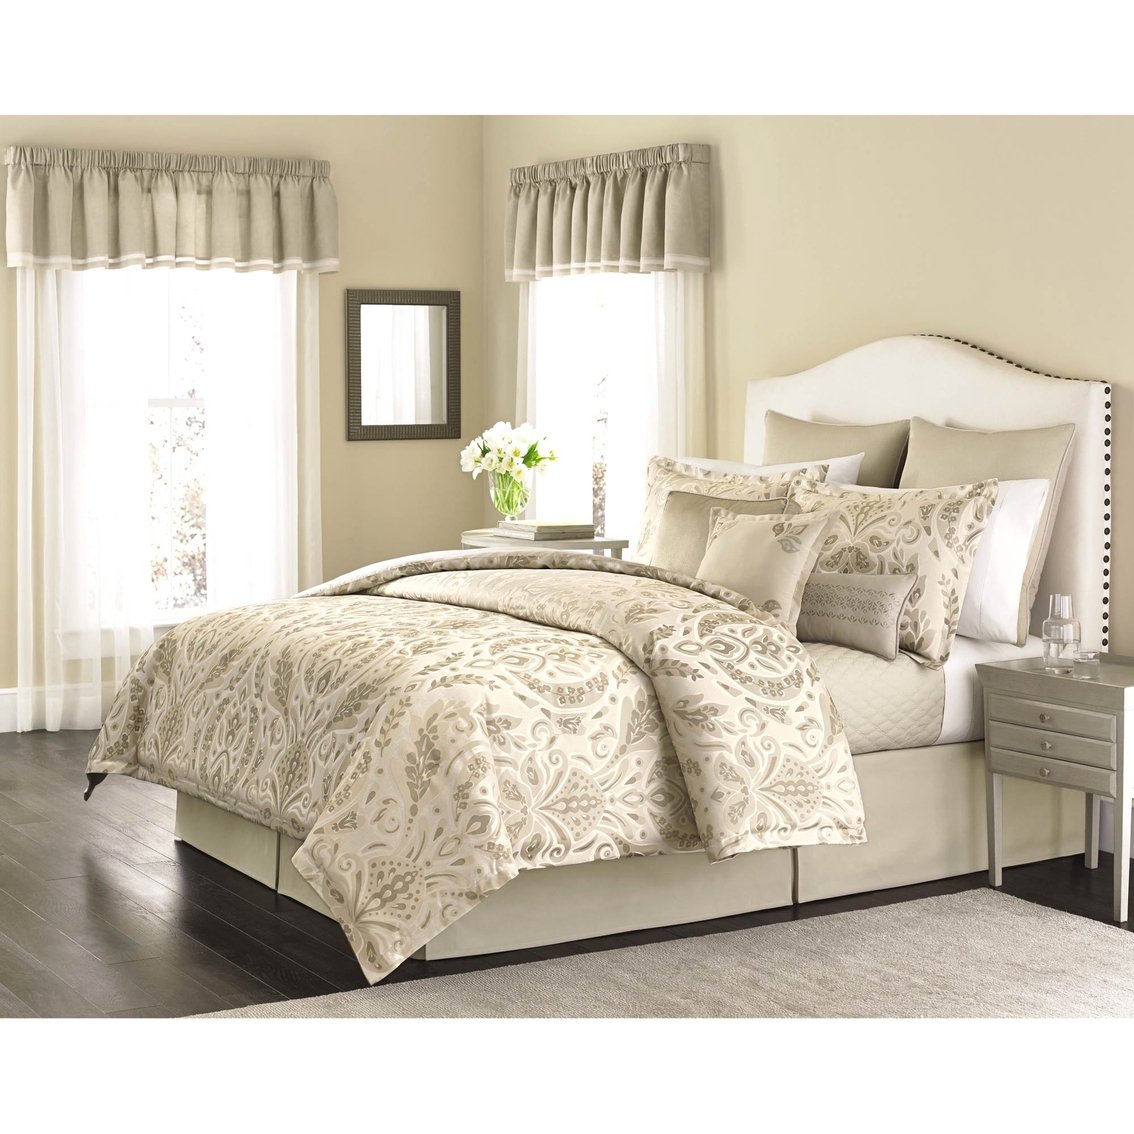 Martha Stewart Collection Hanover Crest 22 Pc. Comforter Set | Bedding Collections | Home ...